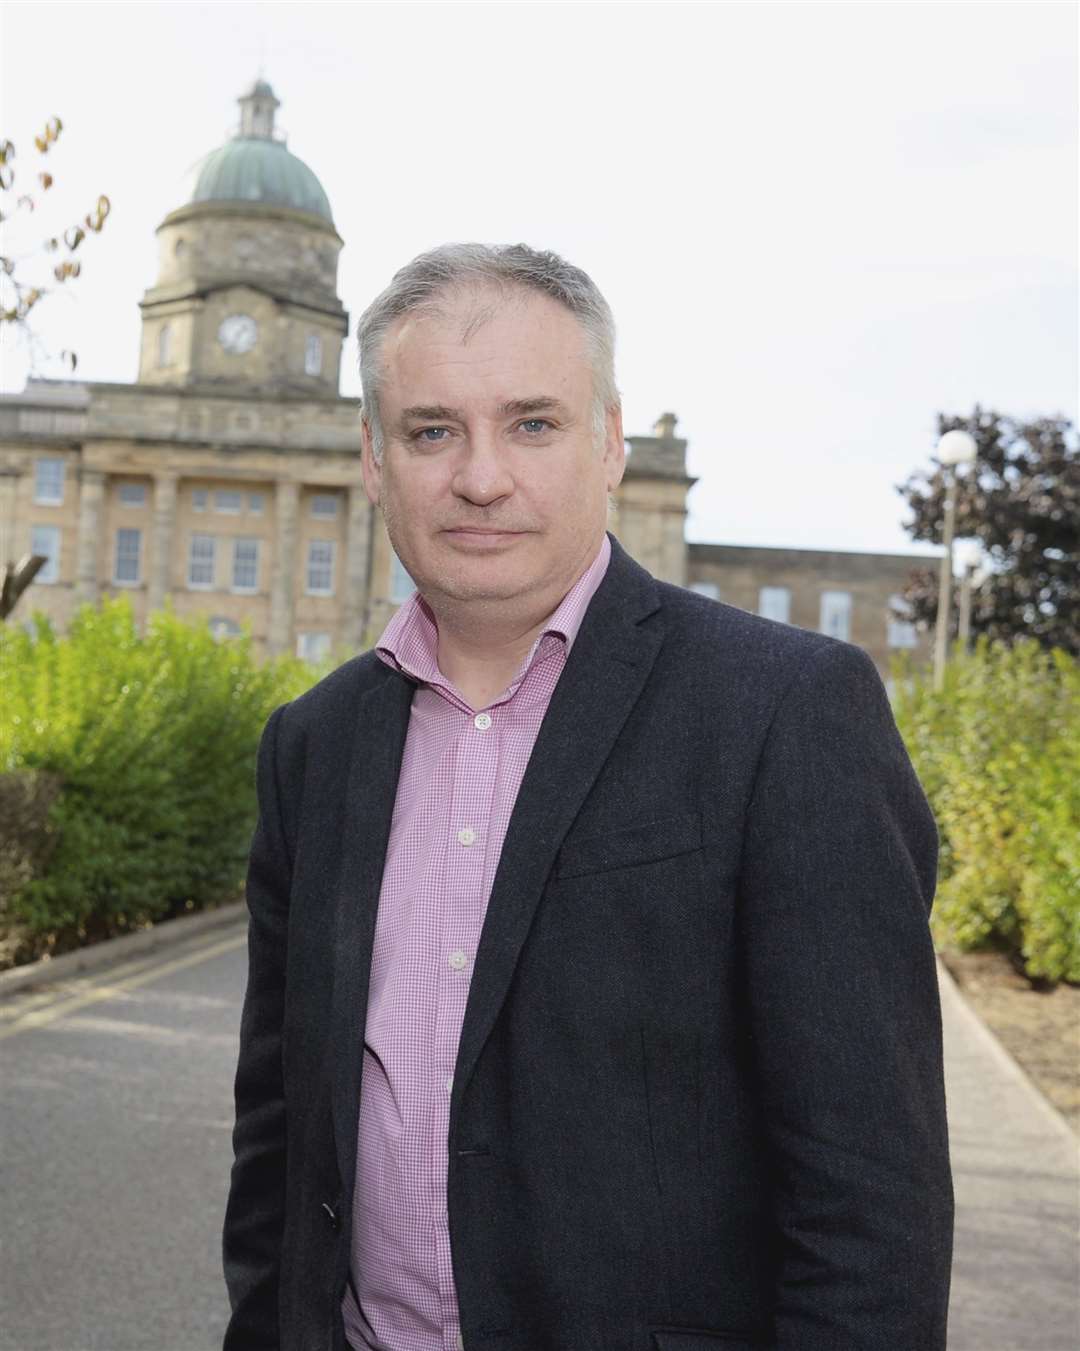 Moray MSP Richard Lochhead has written to NHS Grampian's Chief Executive seeking an update on orthopaedic waiting times. Picture: Daniel Forsyth